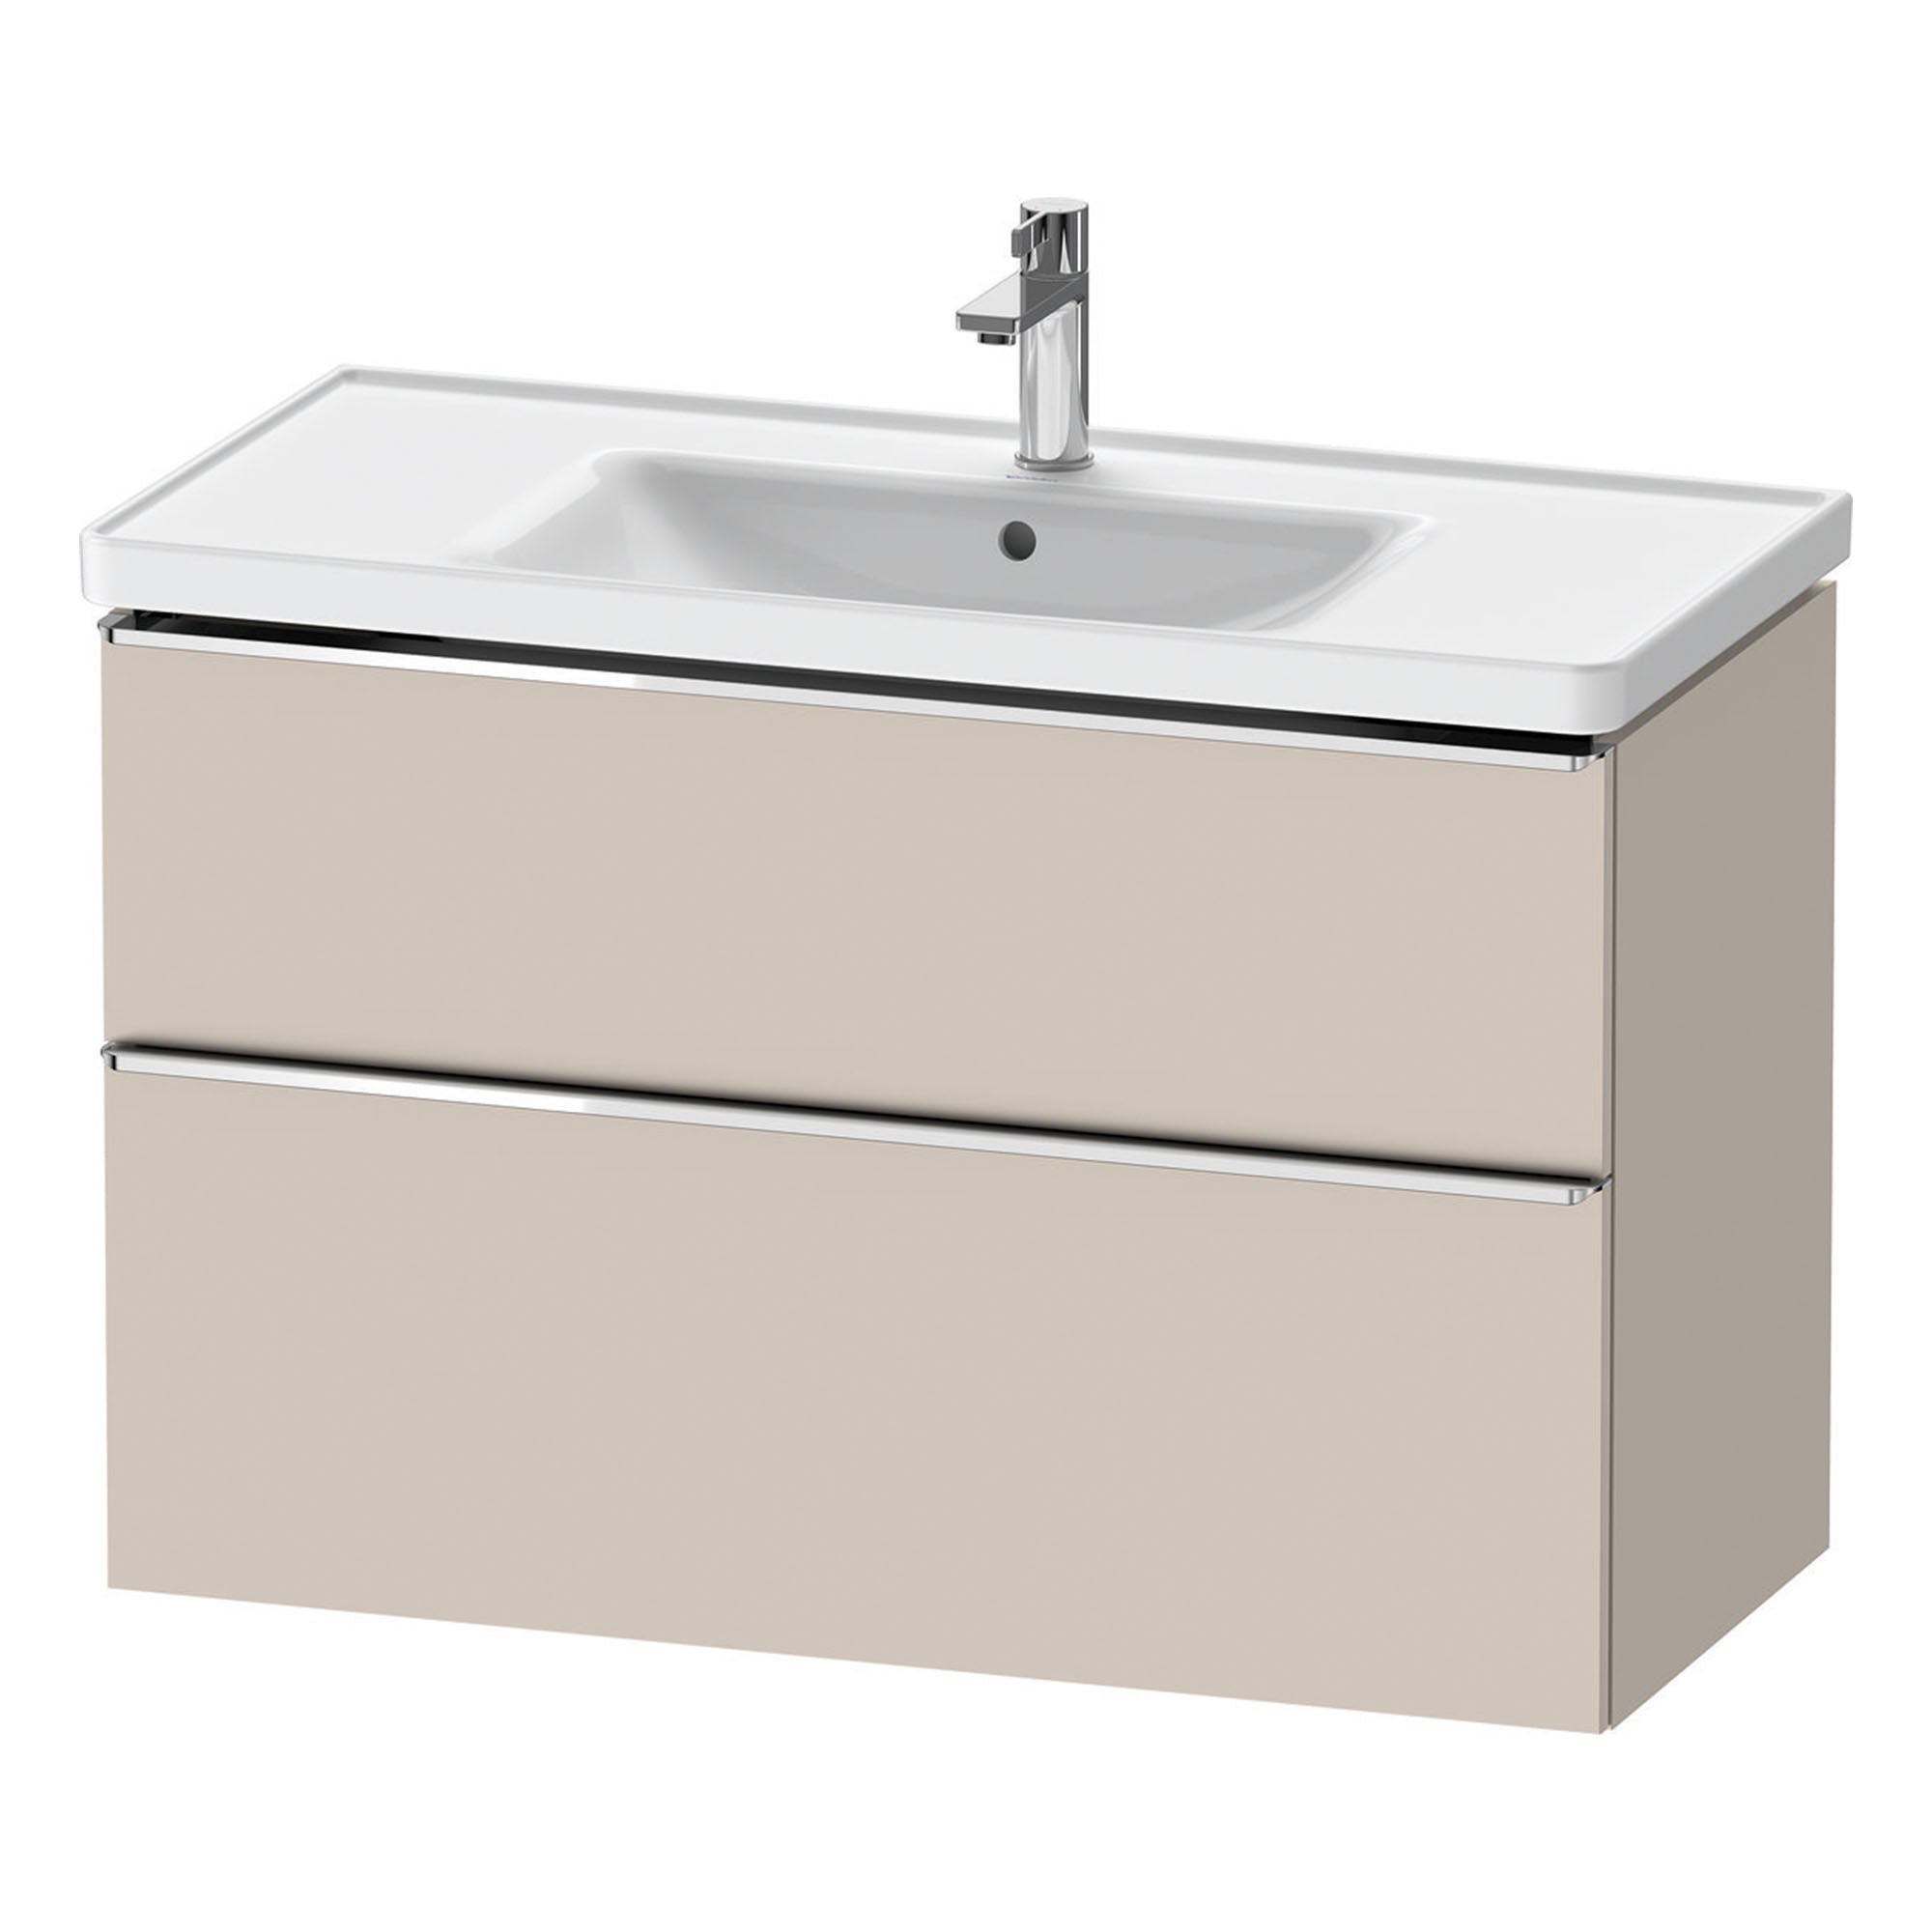 duravit d-neo 1000mm wall mounted vanity unit with d-neo basin taupe chrome handles